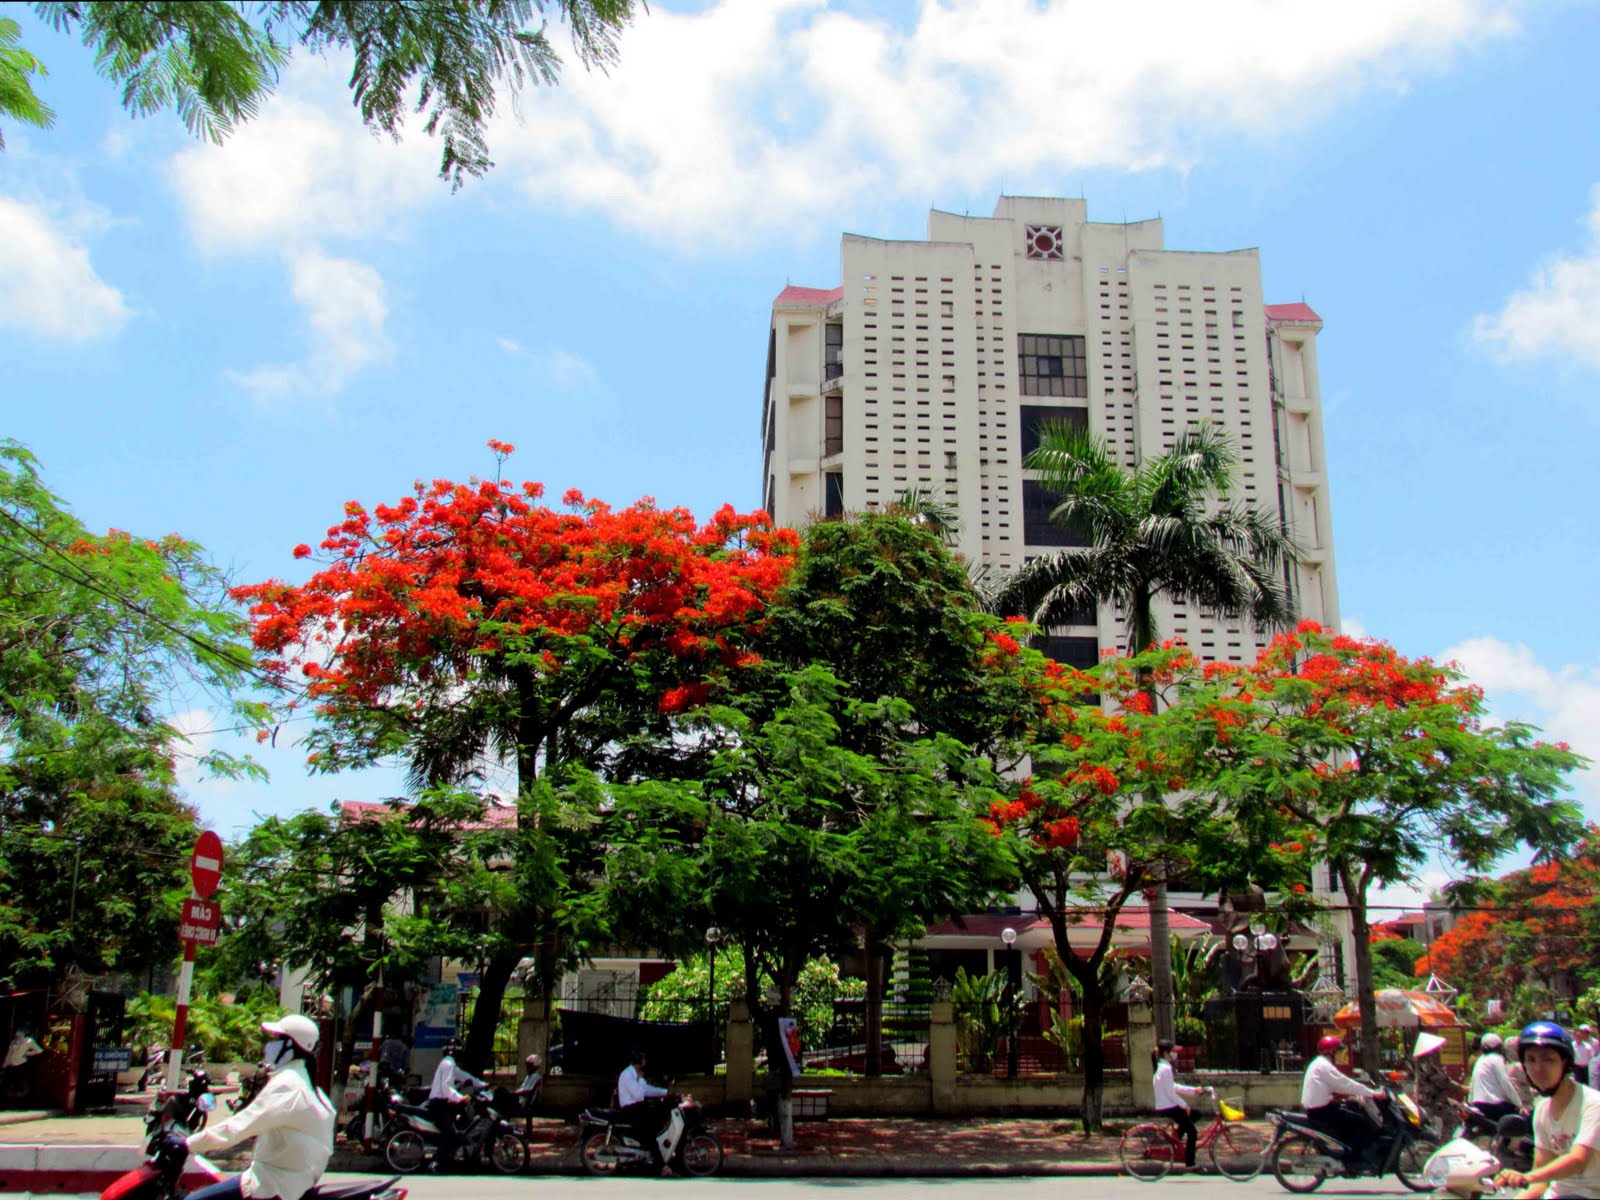 A corner of Hai Phong city with Flame Thrower trees showing off their beautiful red blossoms